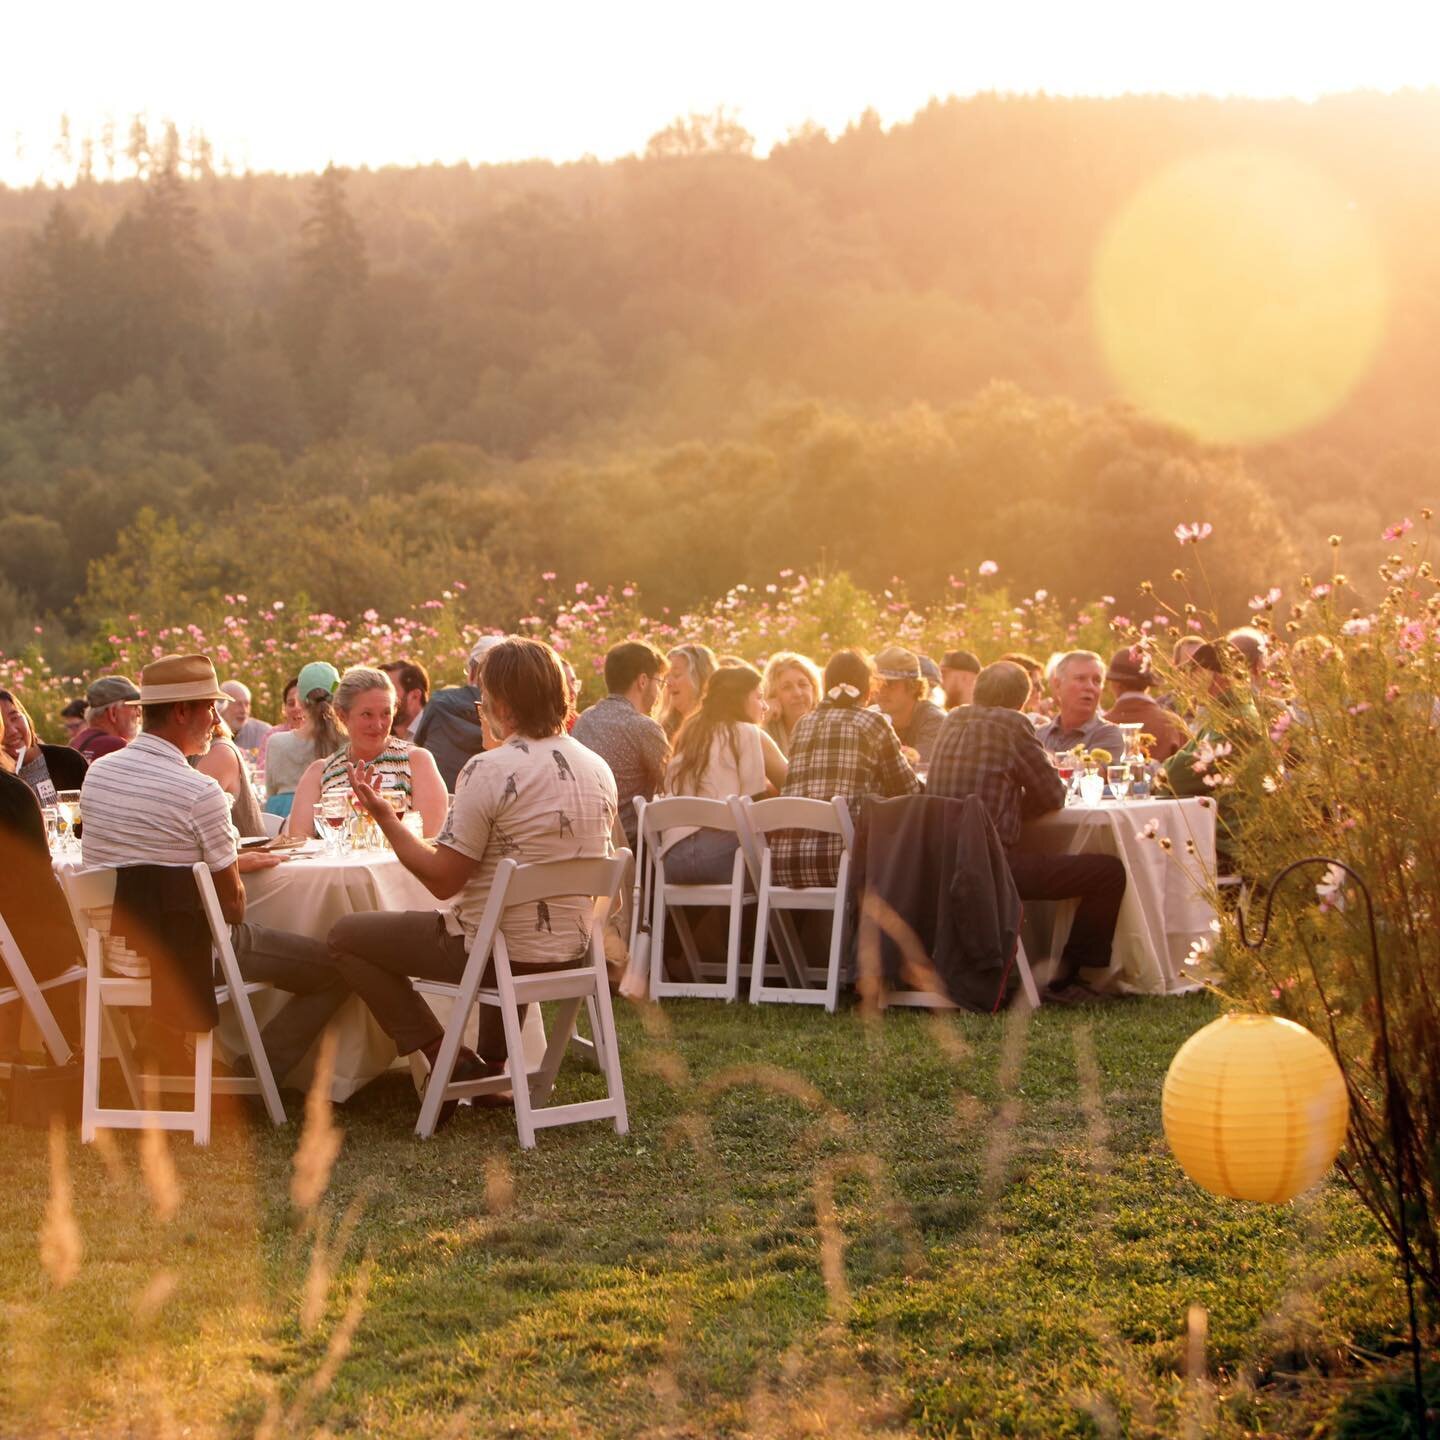 🌻 SAVE THE DATE 🌻 @jeffcofarmersmarkets farm to table benefit dinner is happening here at White Lotus on September 3rd!
.
This was a picture taken by @whaleheartproductionsllc last year and it was such a magical evening celebrating community, local